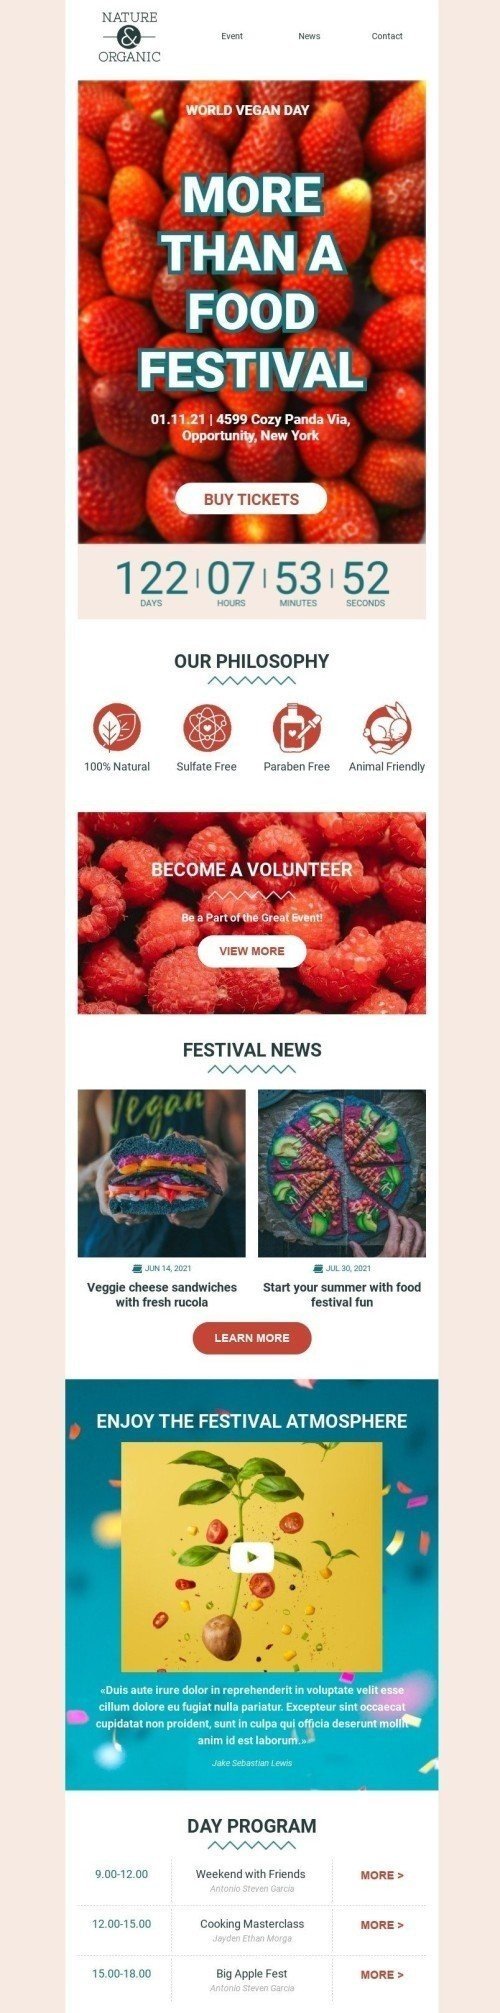 World Vegan Day Email Template «More than a food festival» for Food industry desktop view